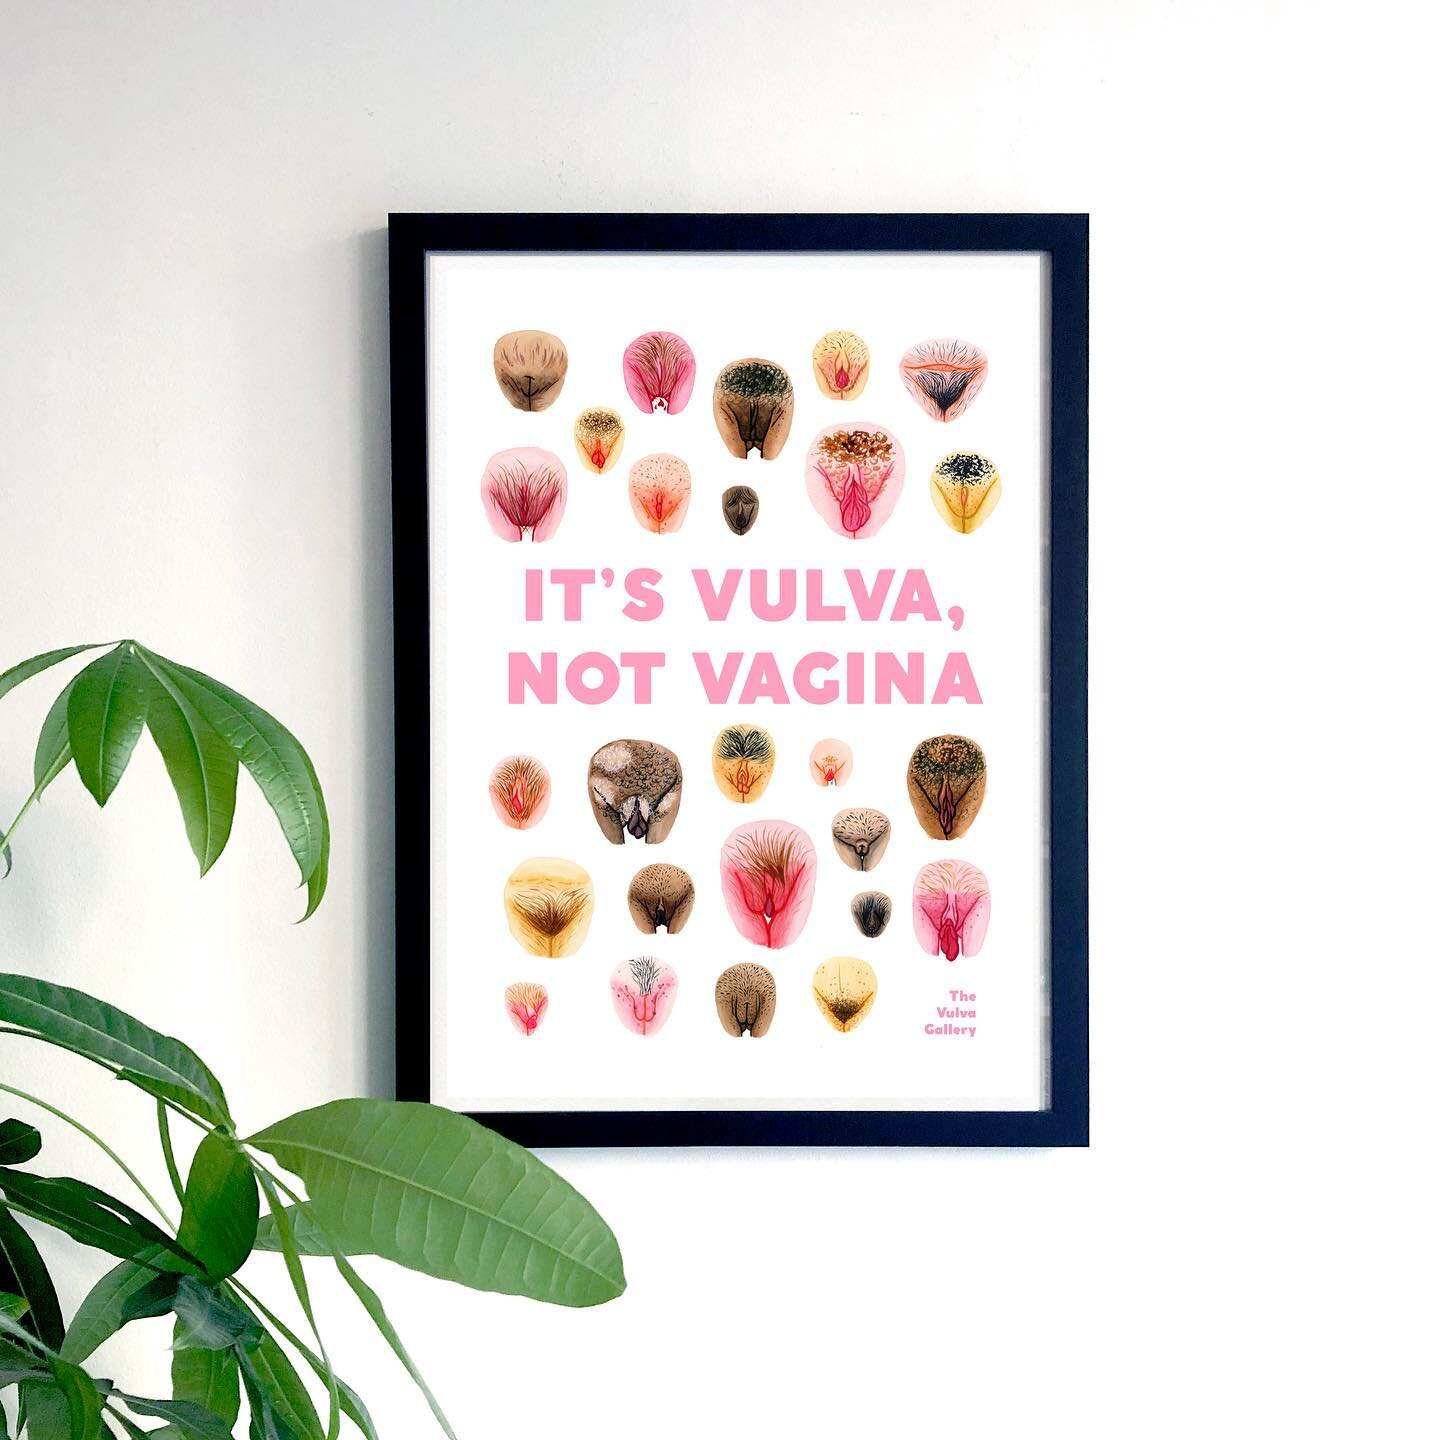 🌈✨ Final day of Print Sale! All prints in my Etsy shop are 30% off (including the education print sets!) 👉🏼 samhilatalanta.etsy.com

If you&rsquo;ve had your eye on a vulva diversity or anatomy print - now is the time to get them with a sweet disc